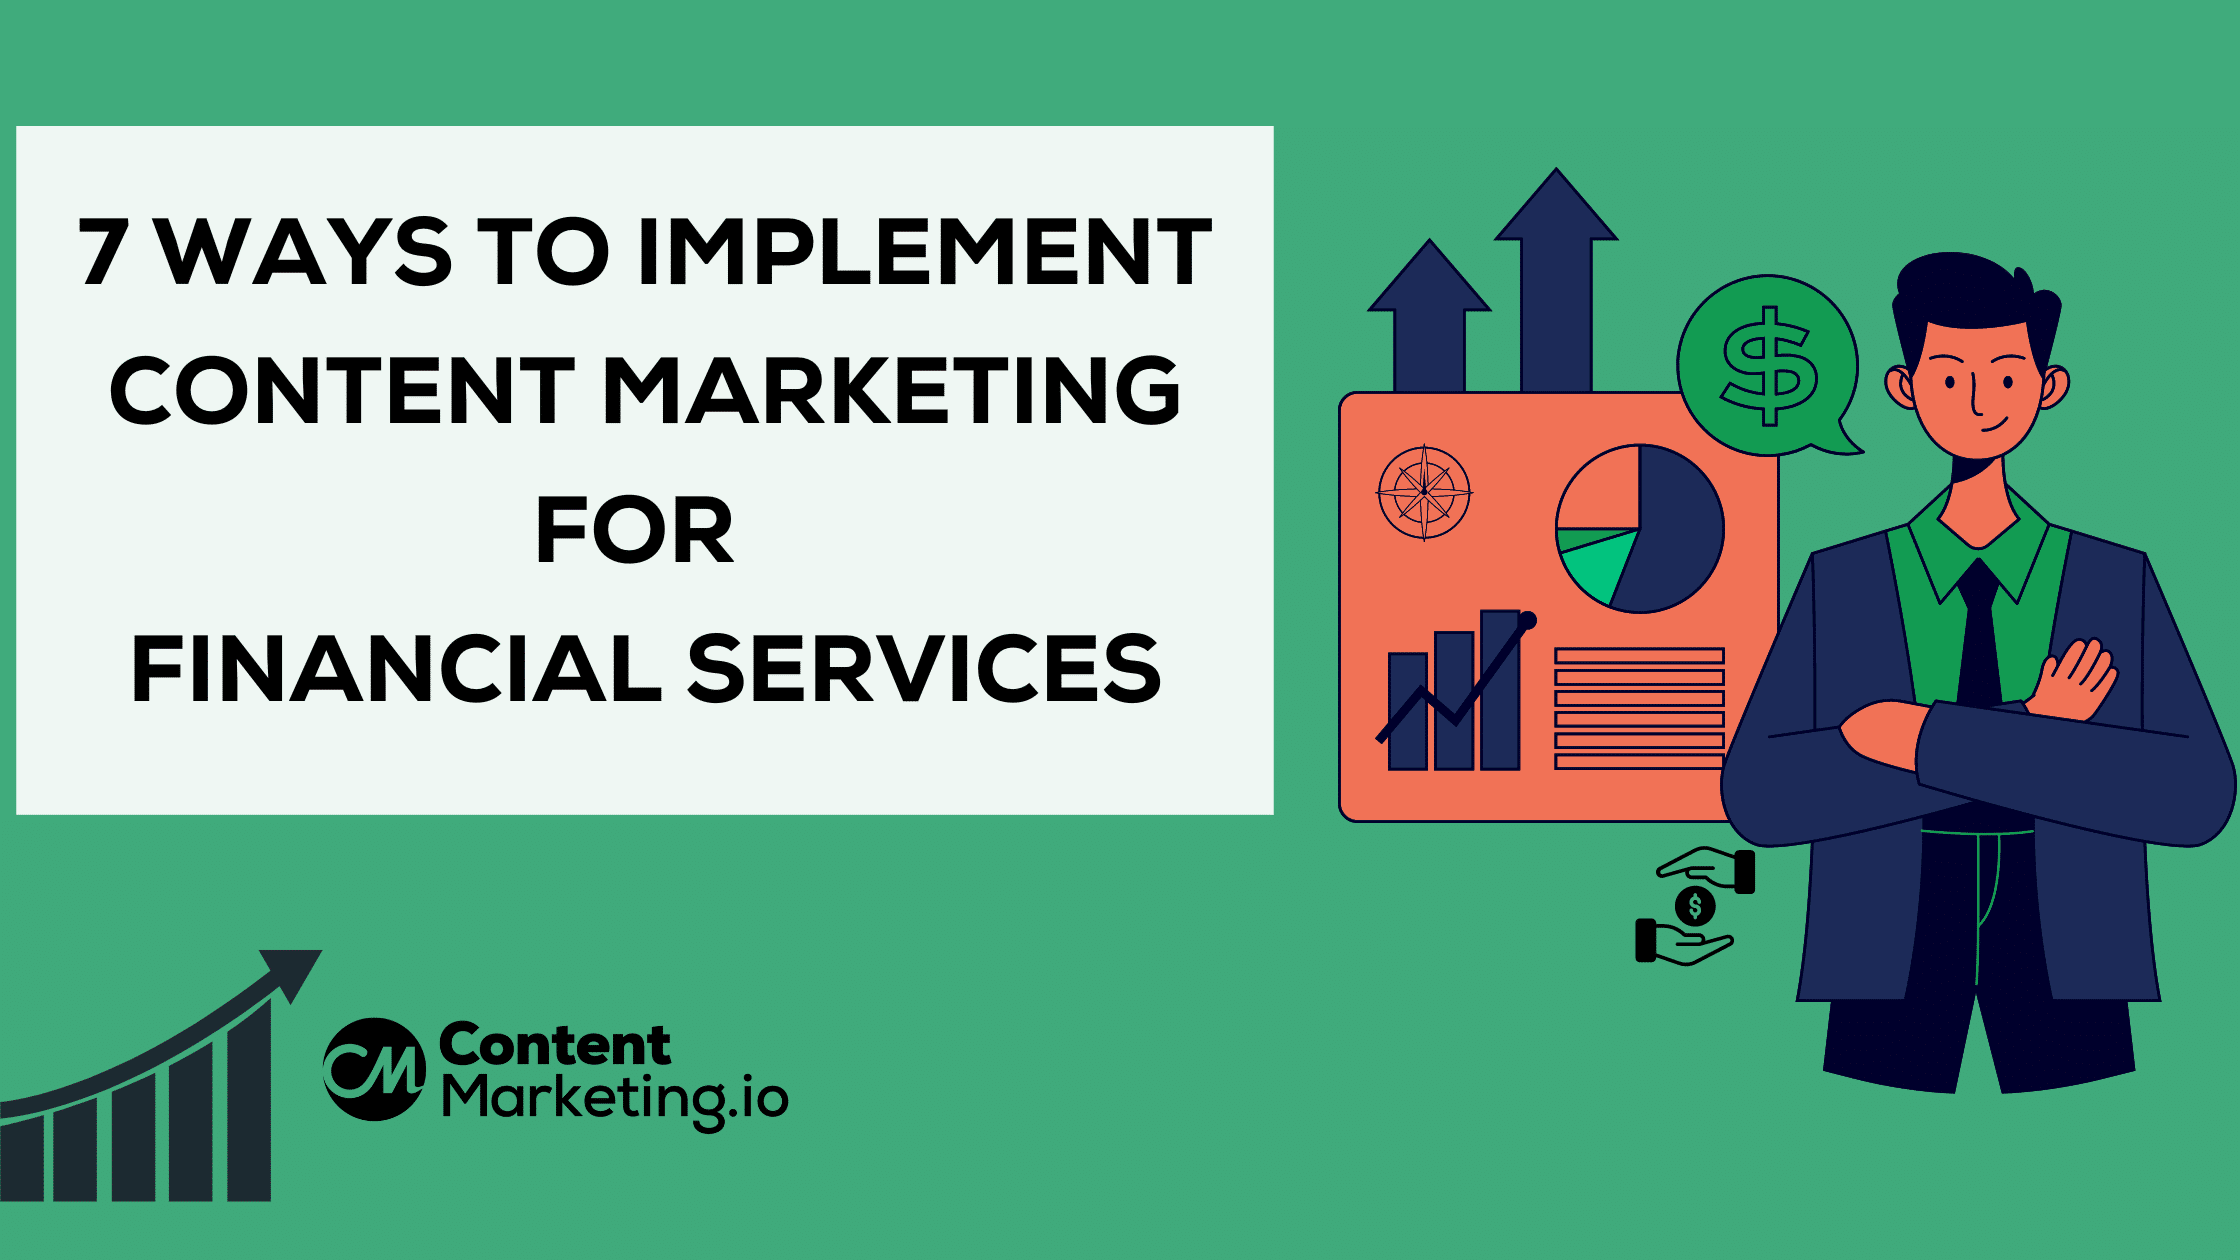 Content Marketing for Financial Services